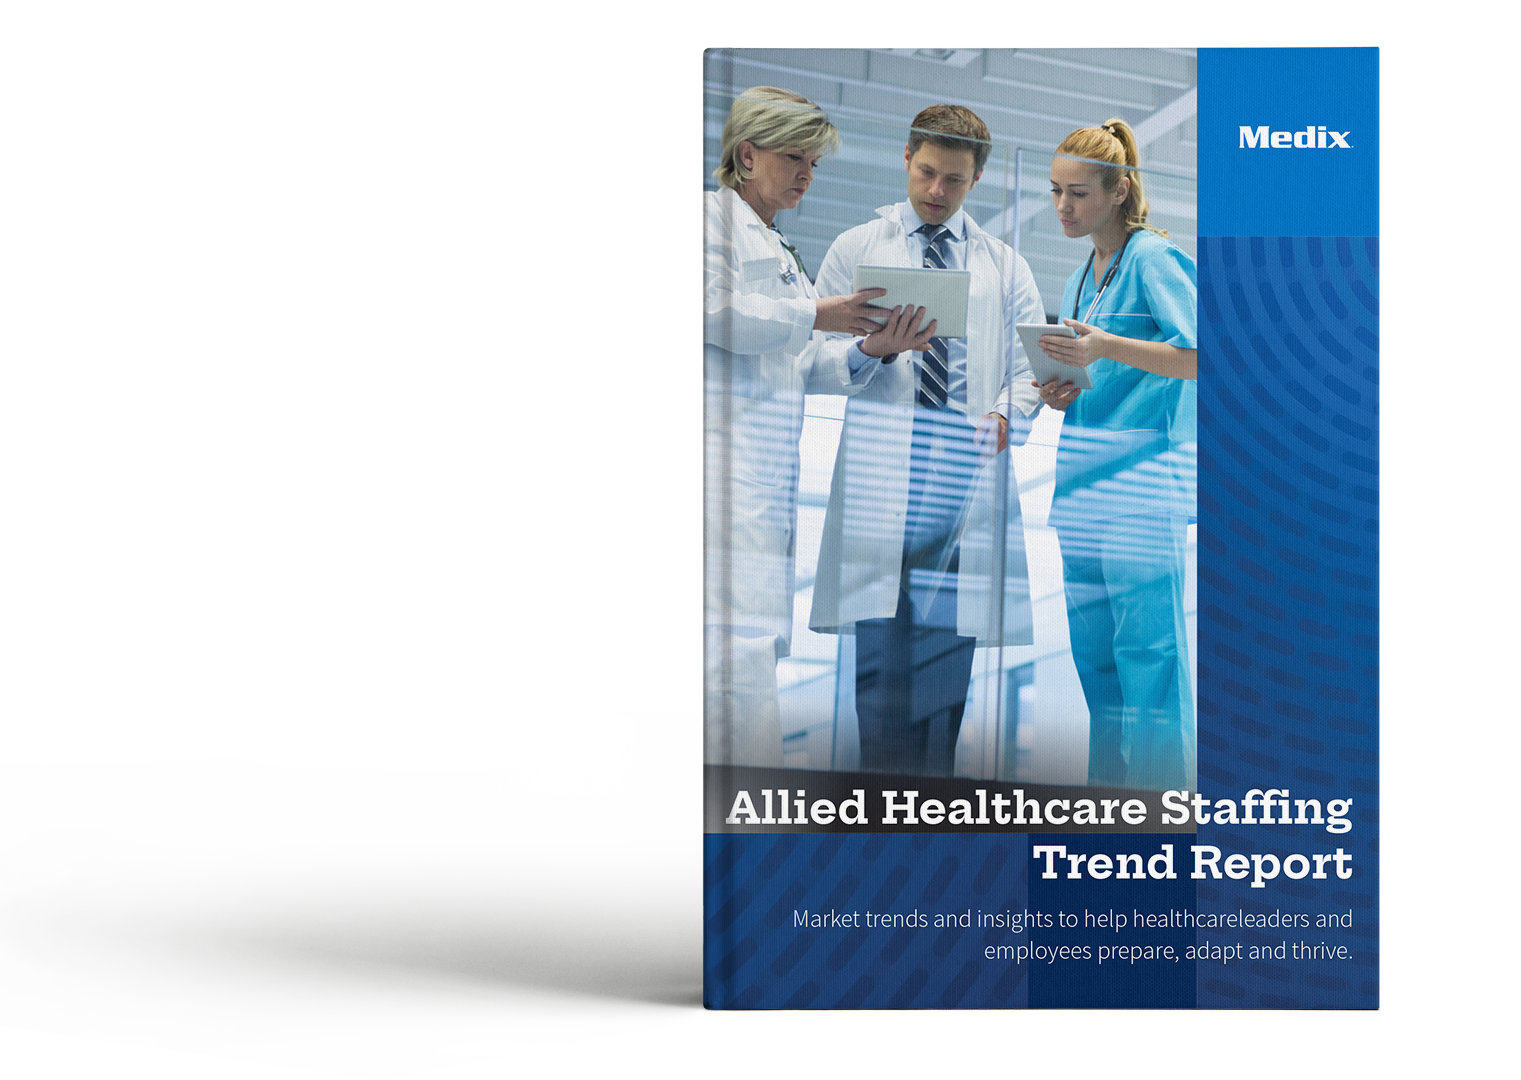 Allied Healthcare Staffing Trend Report - Medix - Isolated Image